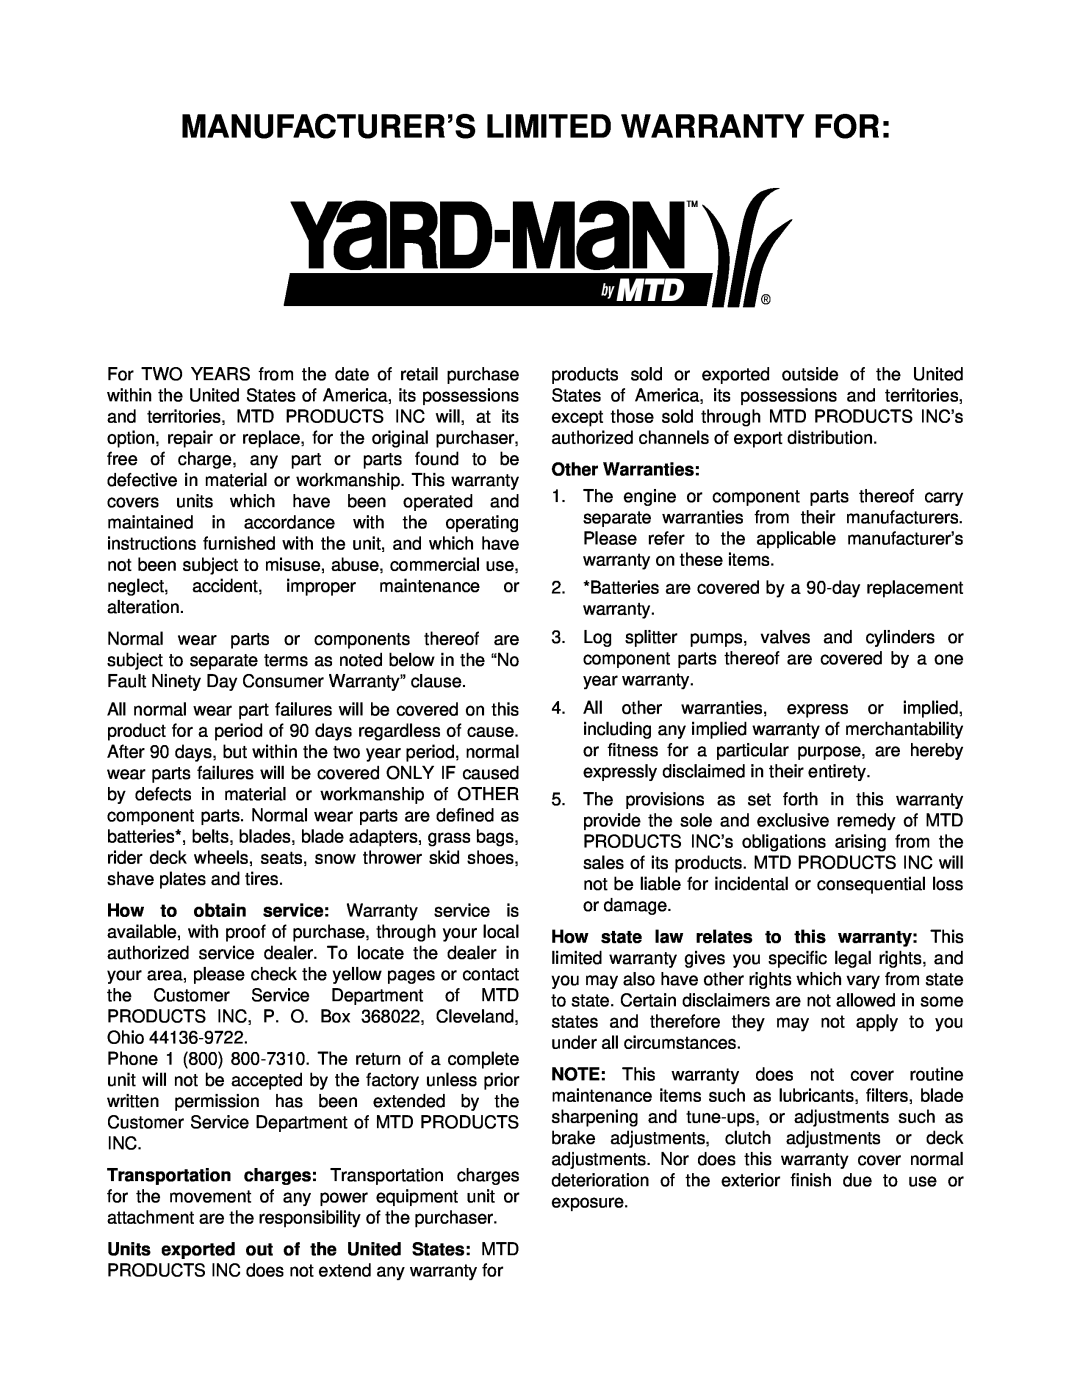 Yard-Man 31AE573H401, 31AE553F401 manual Manufacturer’S Limited Warranty For 